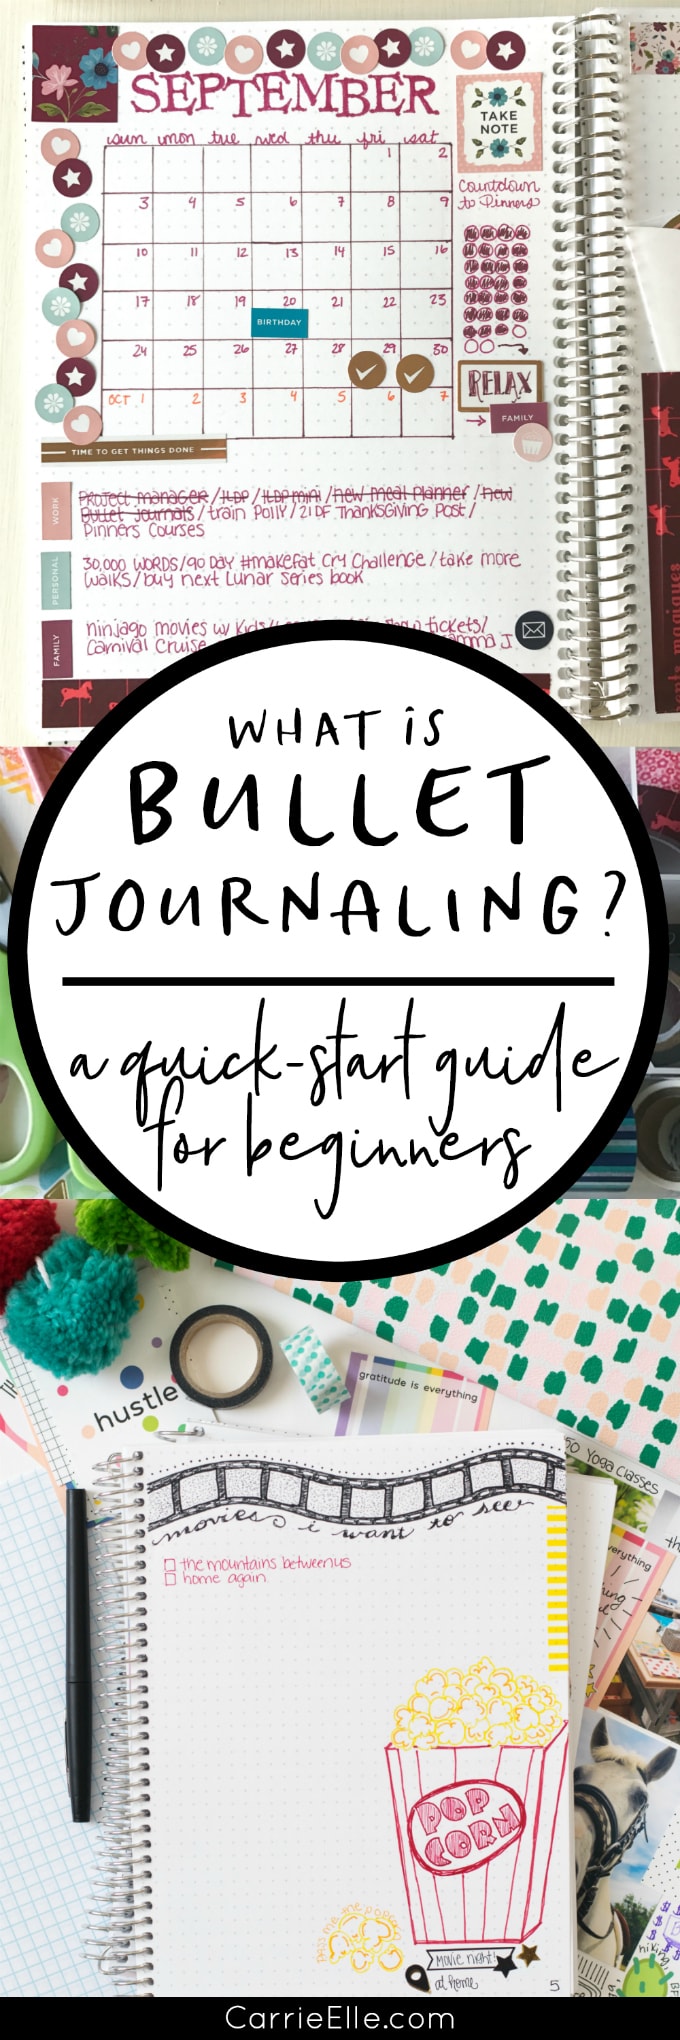 What is Bullet Journaling